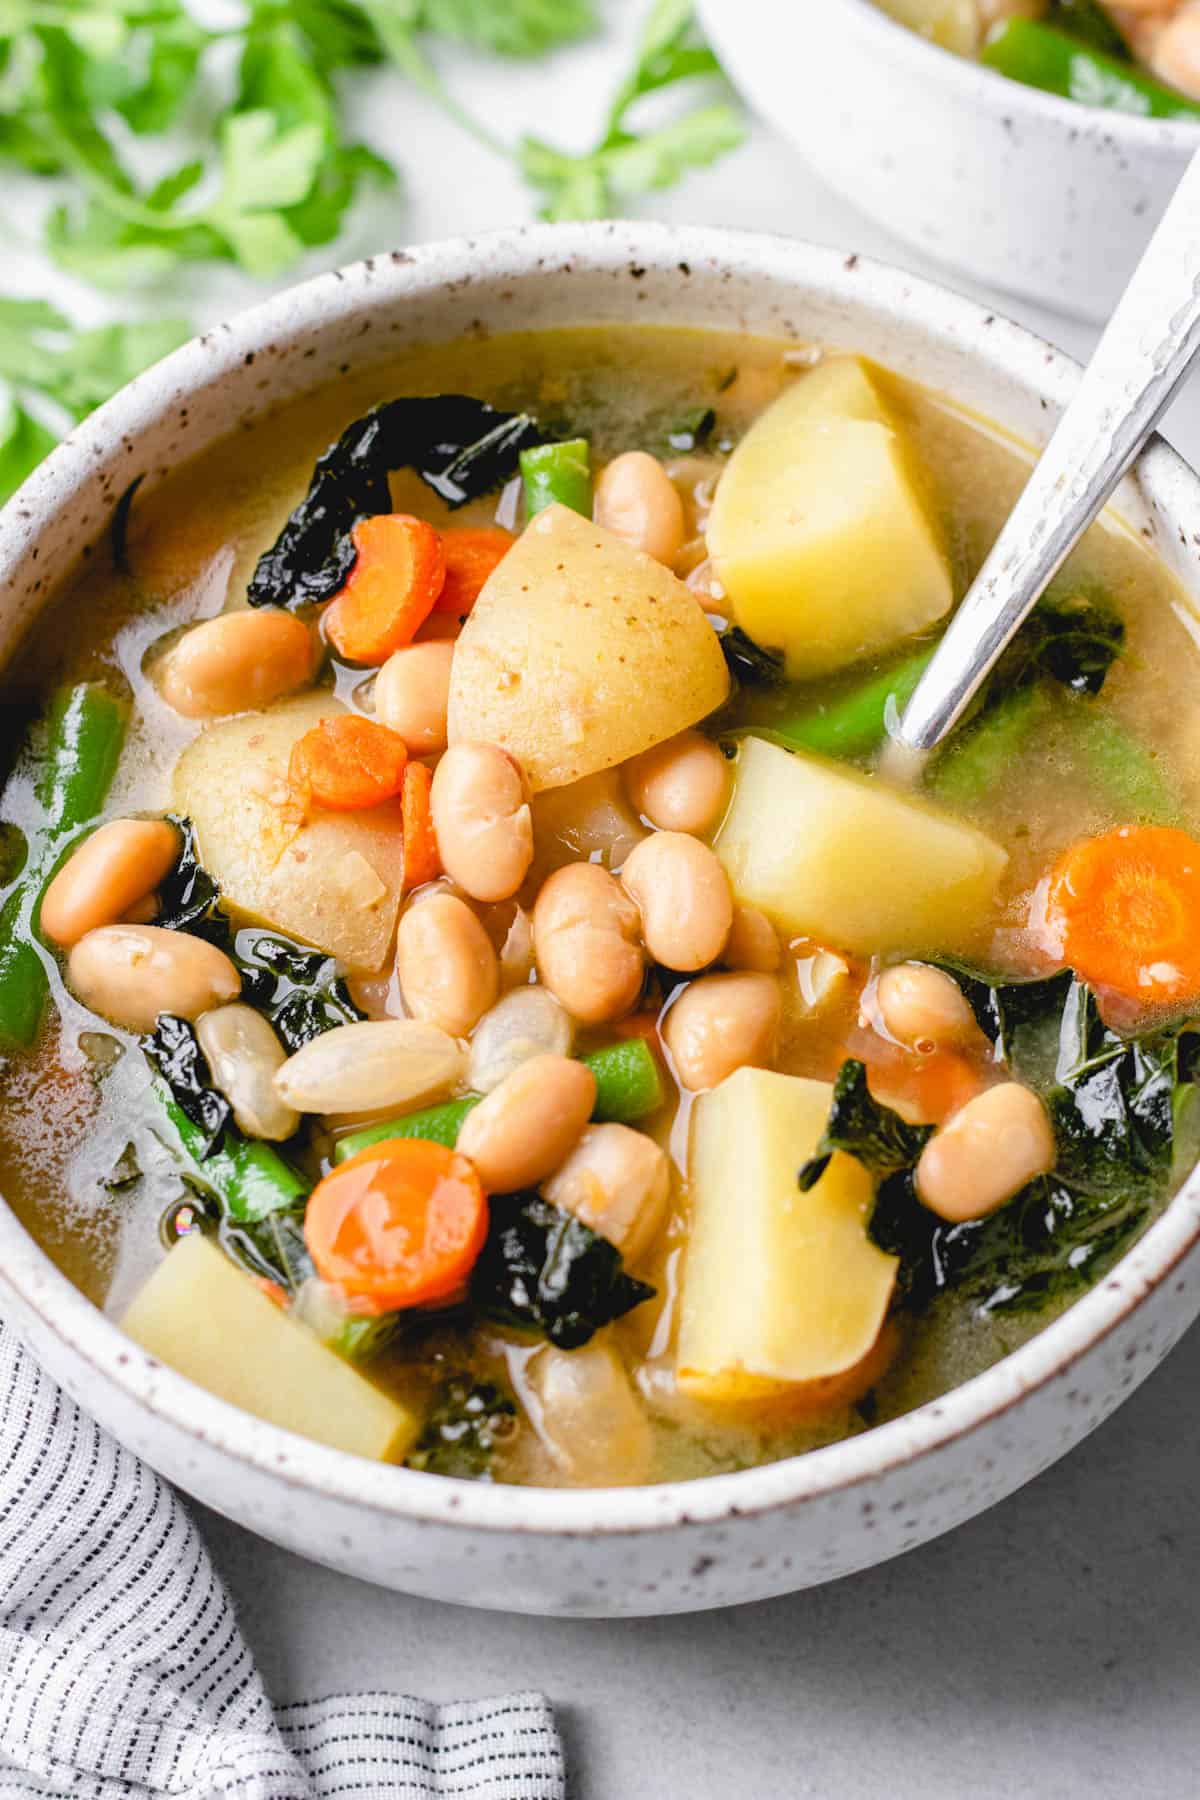 Soup with white beans, potatoes carrots, kale, and green beans in a bowl.